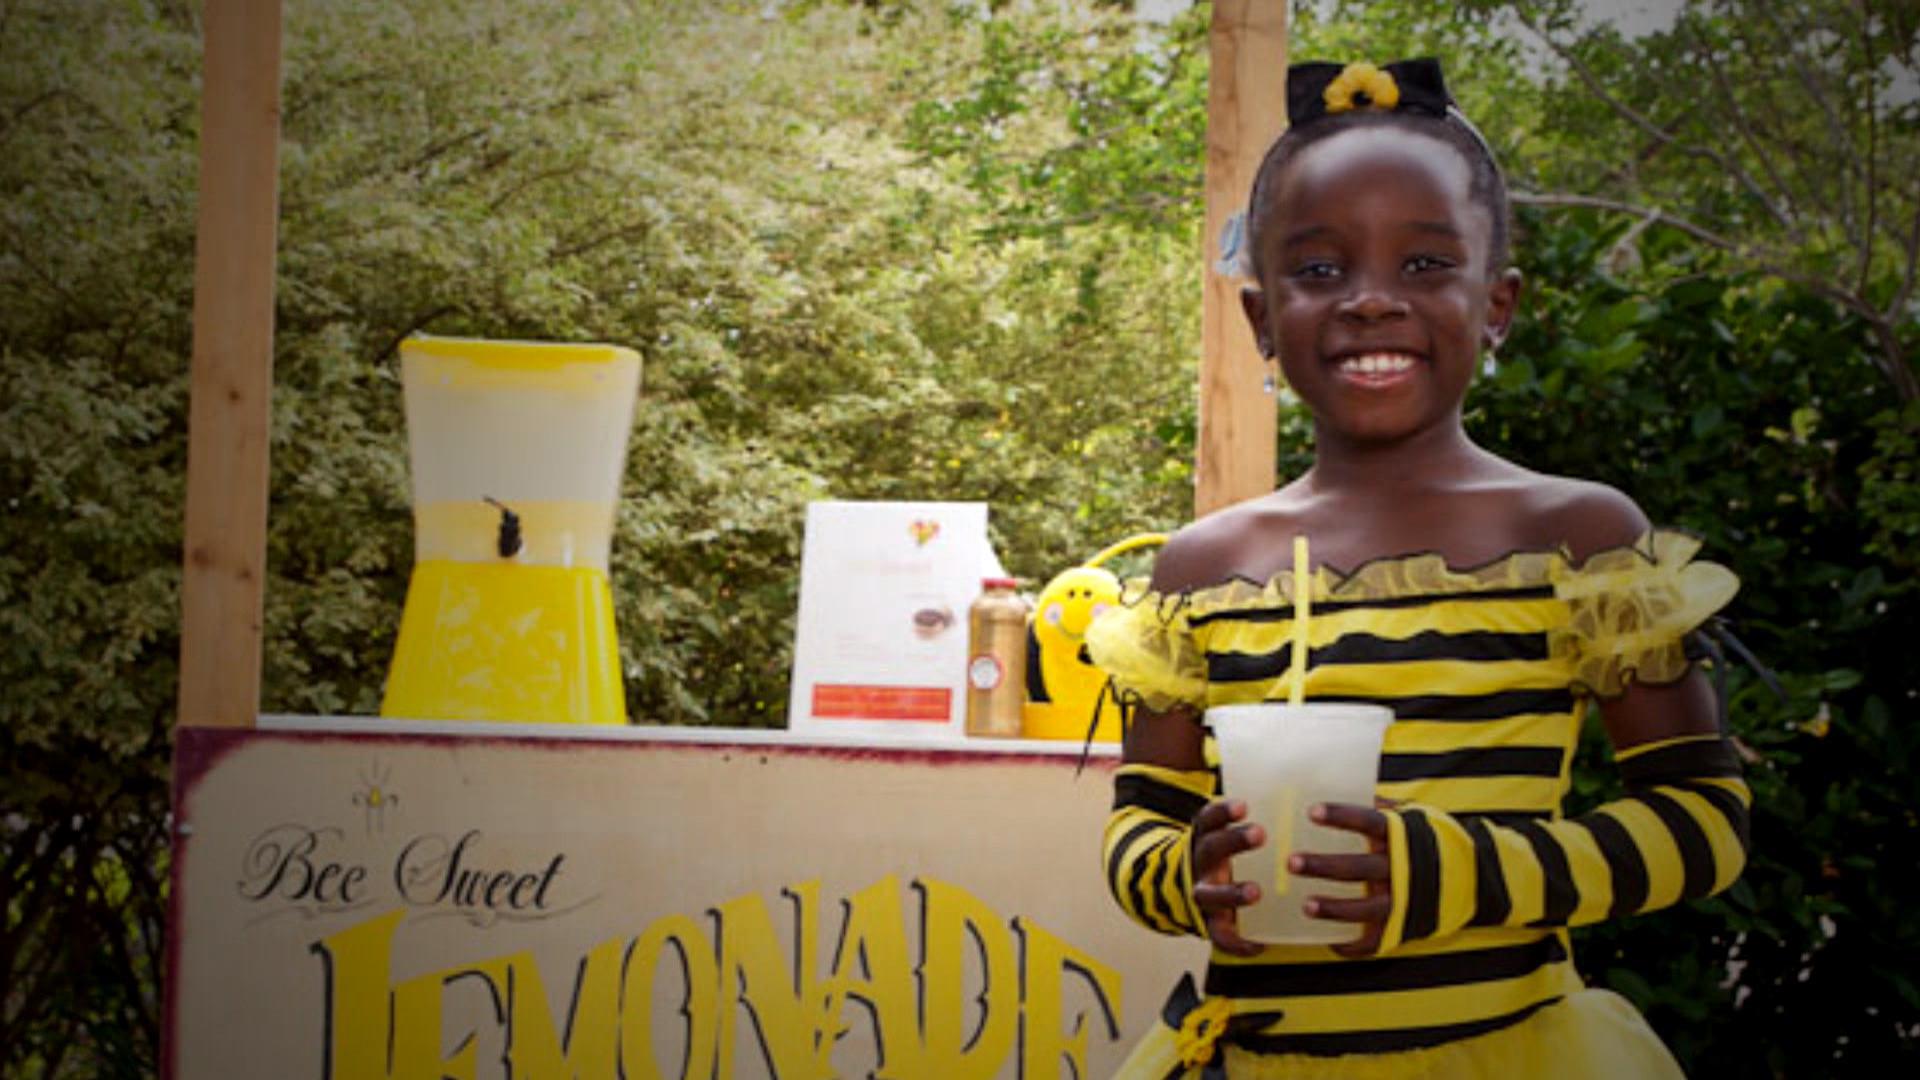 Mikaila Ulmer The Teenager Reinventing The Lemonade Stand Finance Friday 